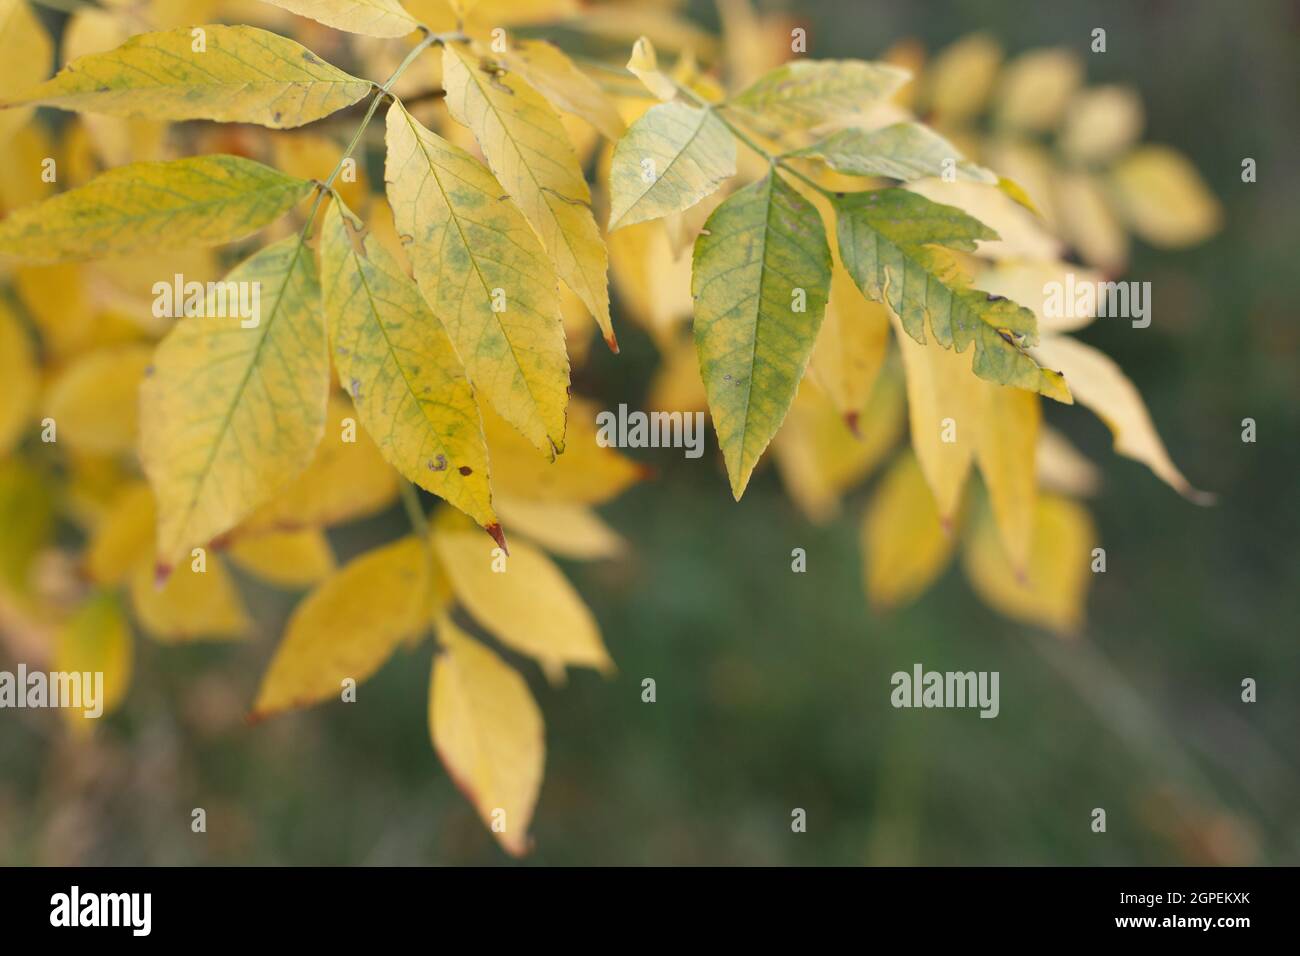 Autumn tree branch with yellow leaves Stock Photo